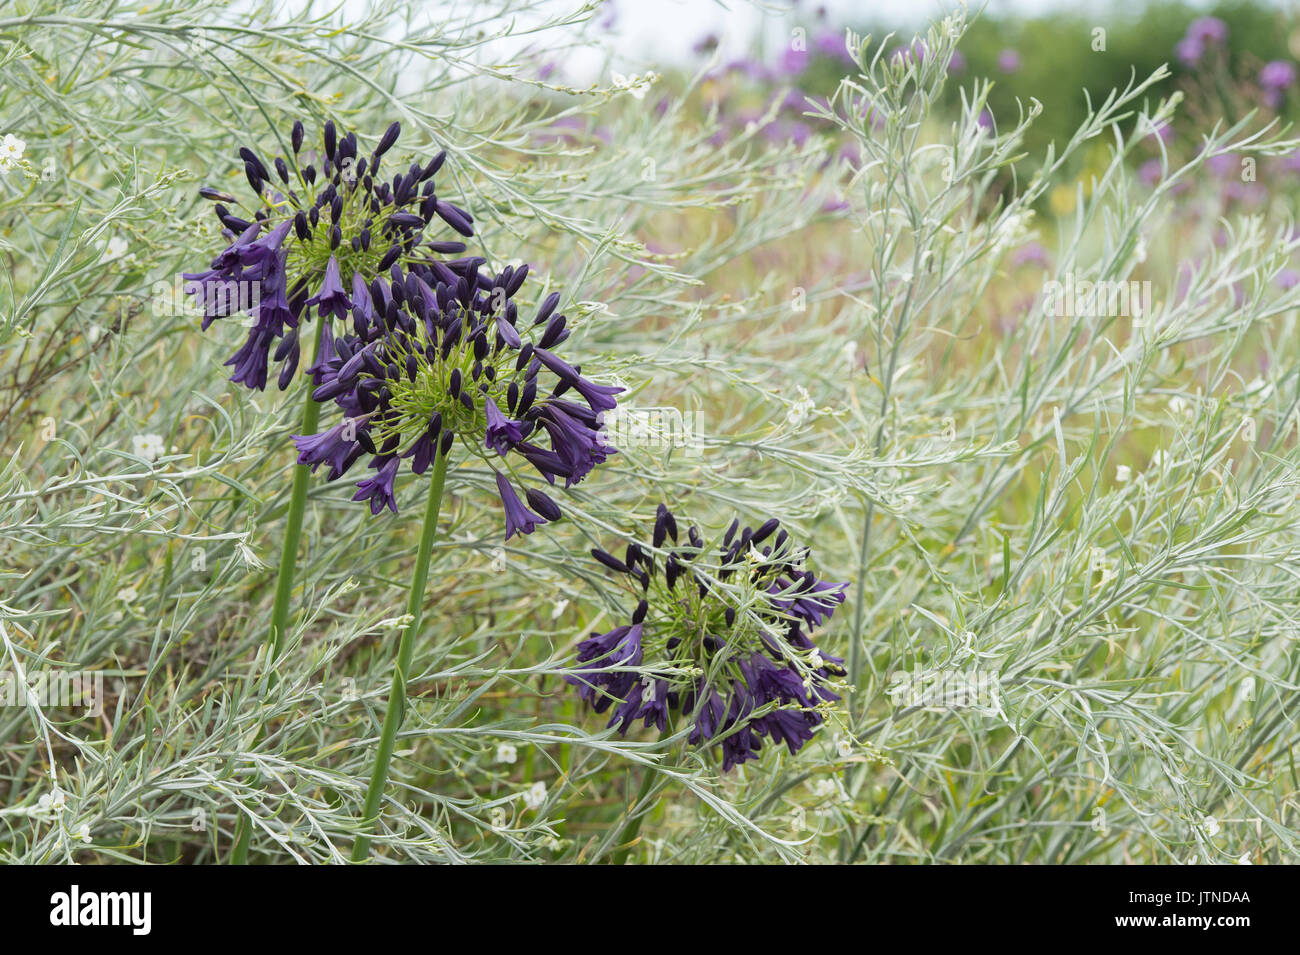 Agapanthus inapertus hybrid. African blue lily flowers in a garden border. UK Stock Photo